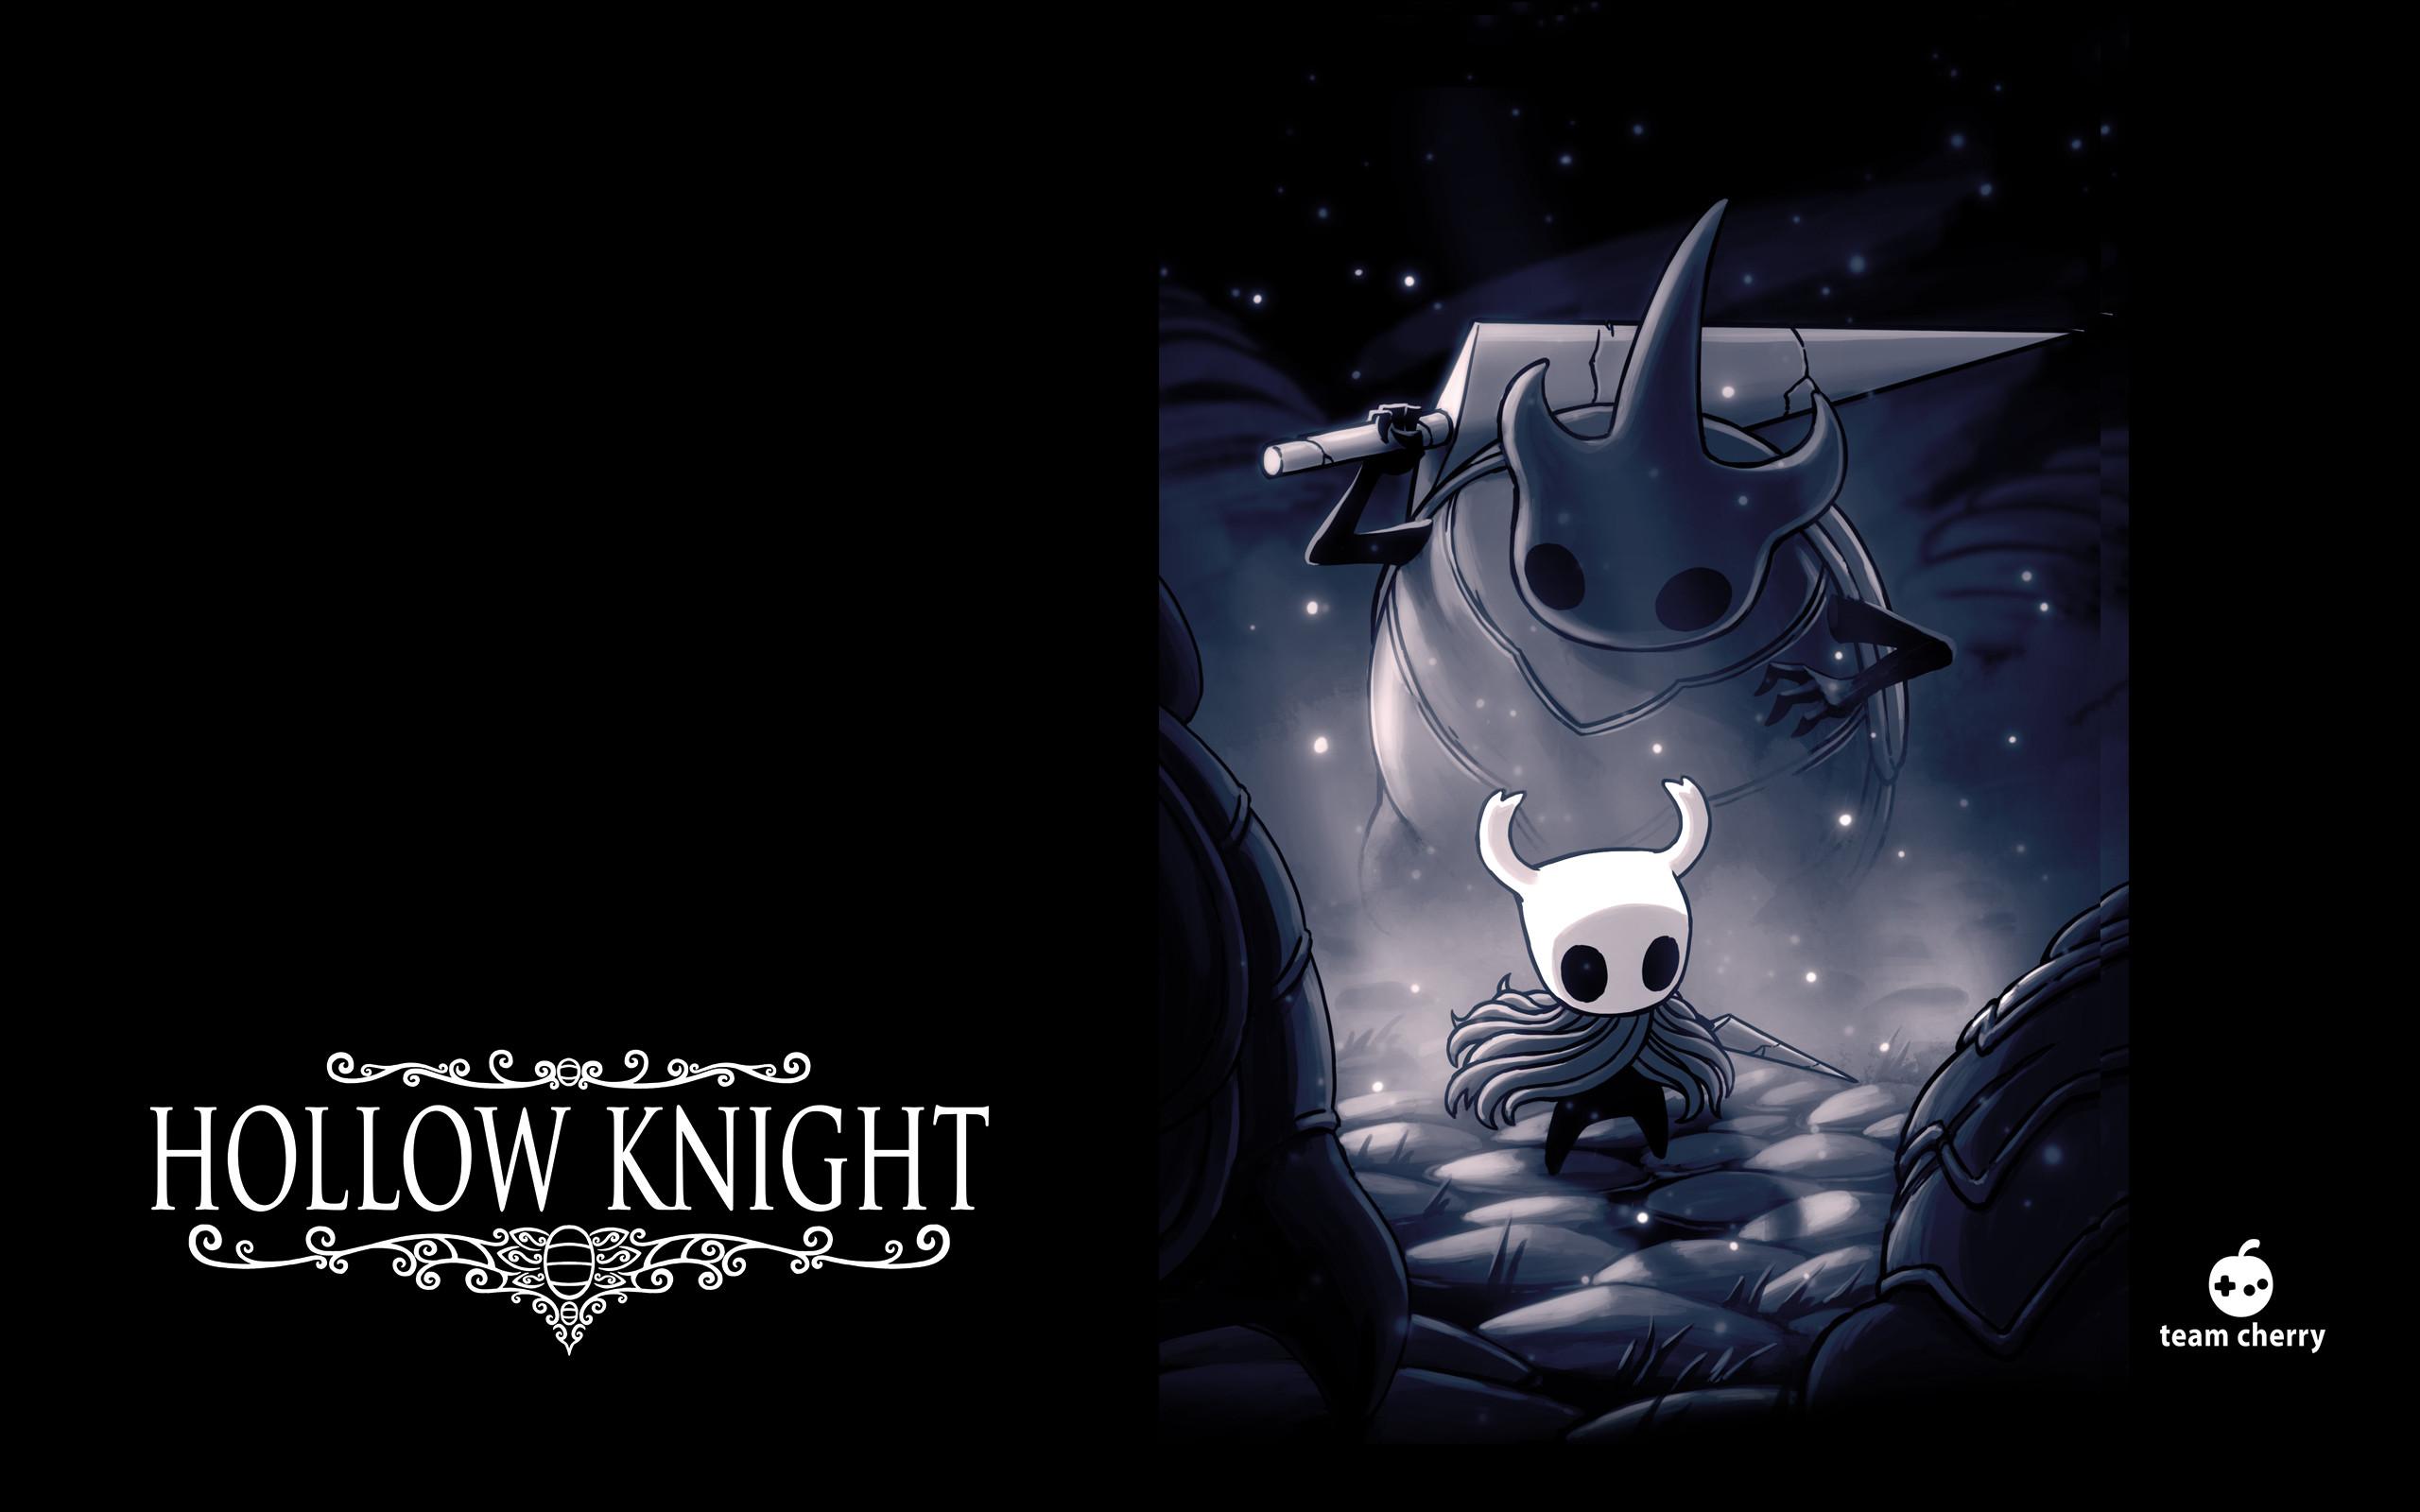 Hollow Knight, 7 Days to Die, and Hitman Available on Humble Monthly